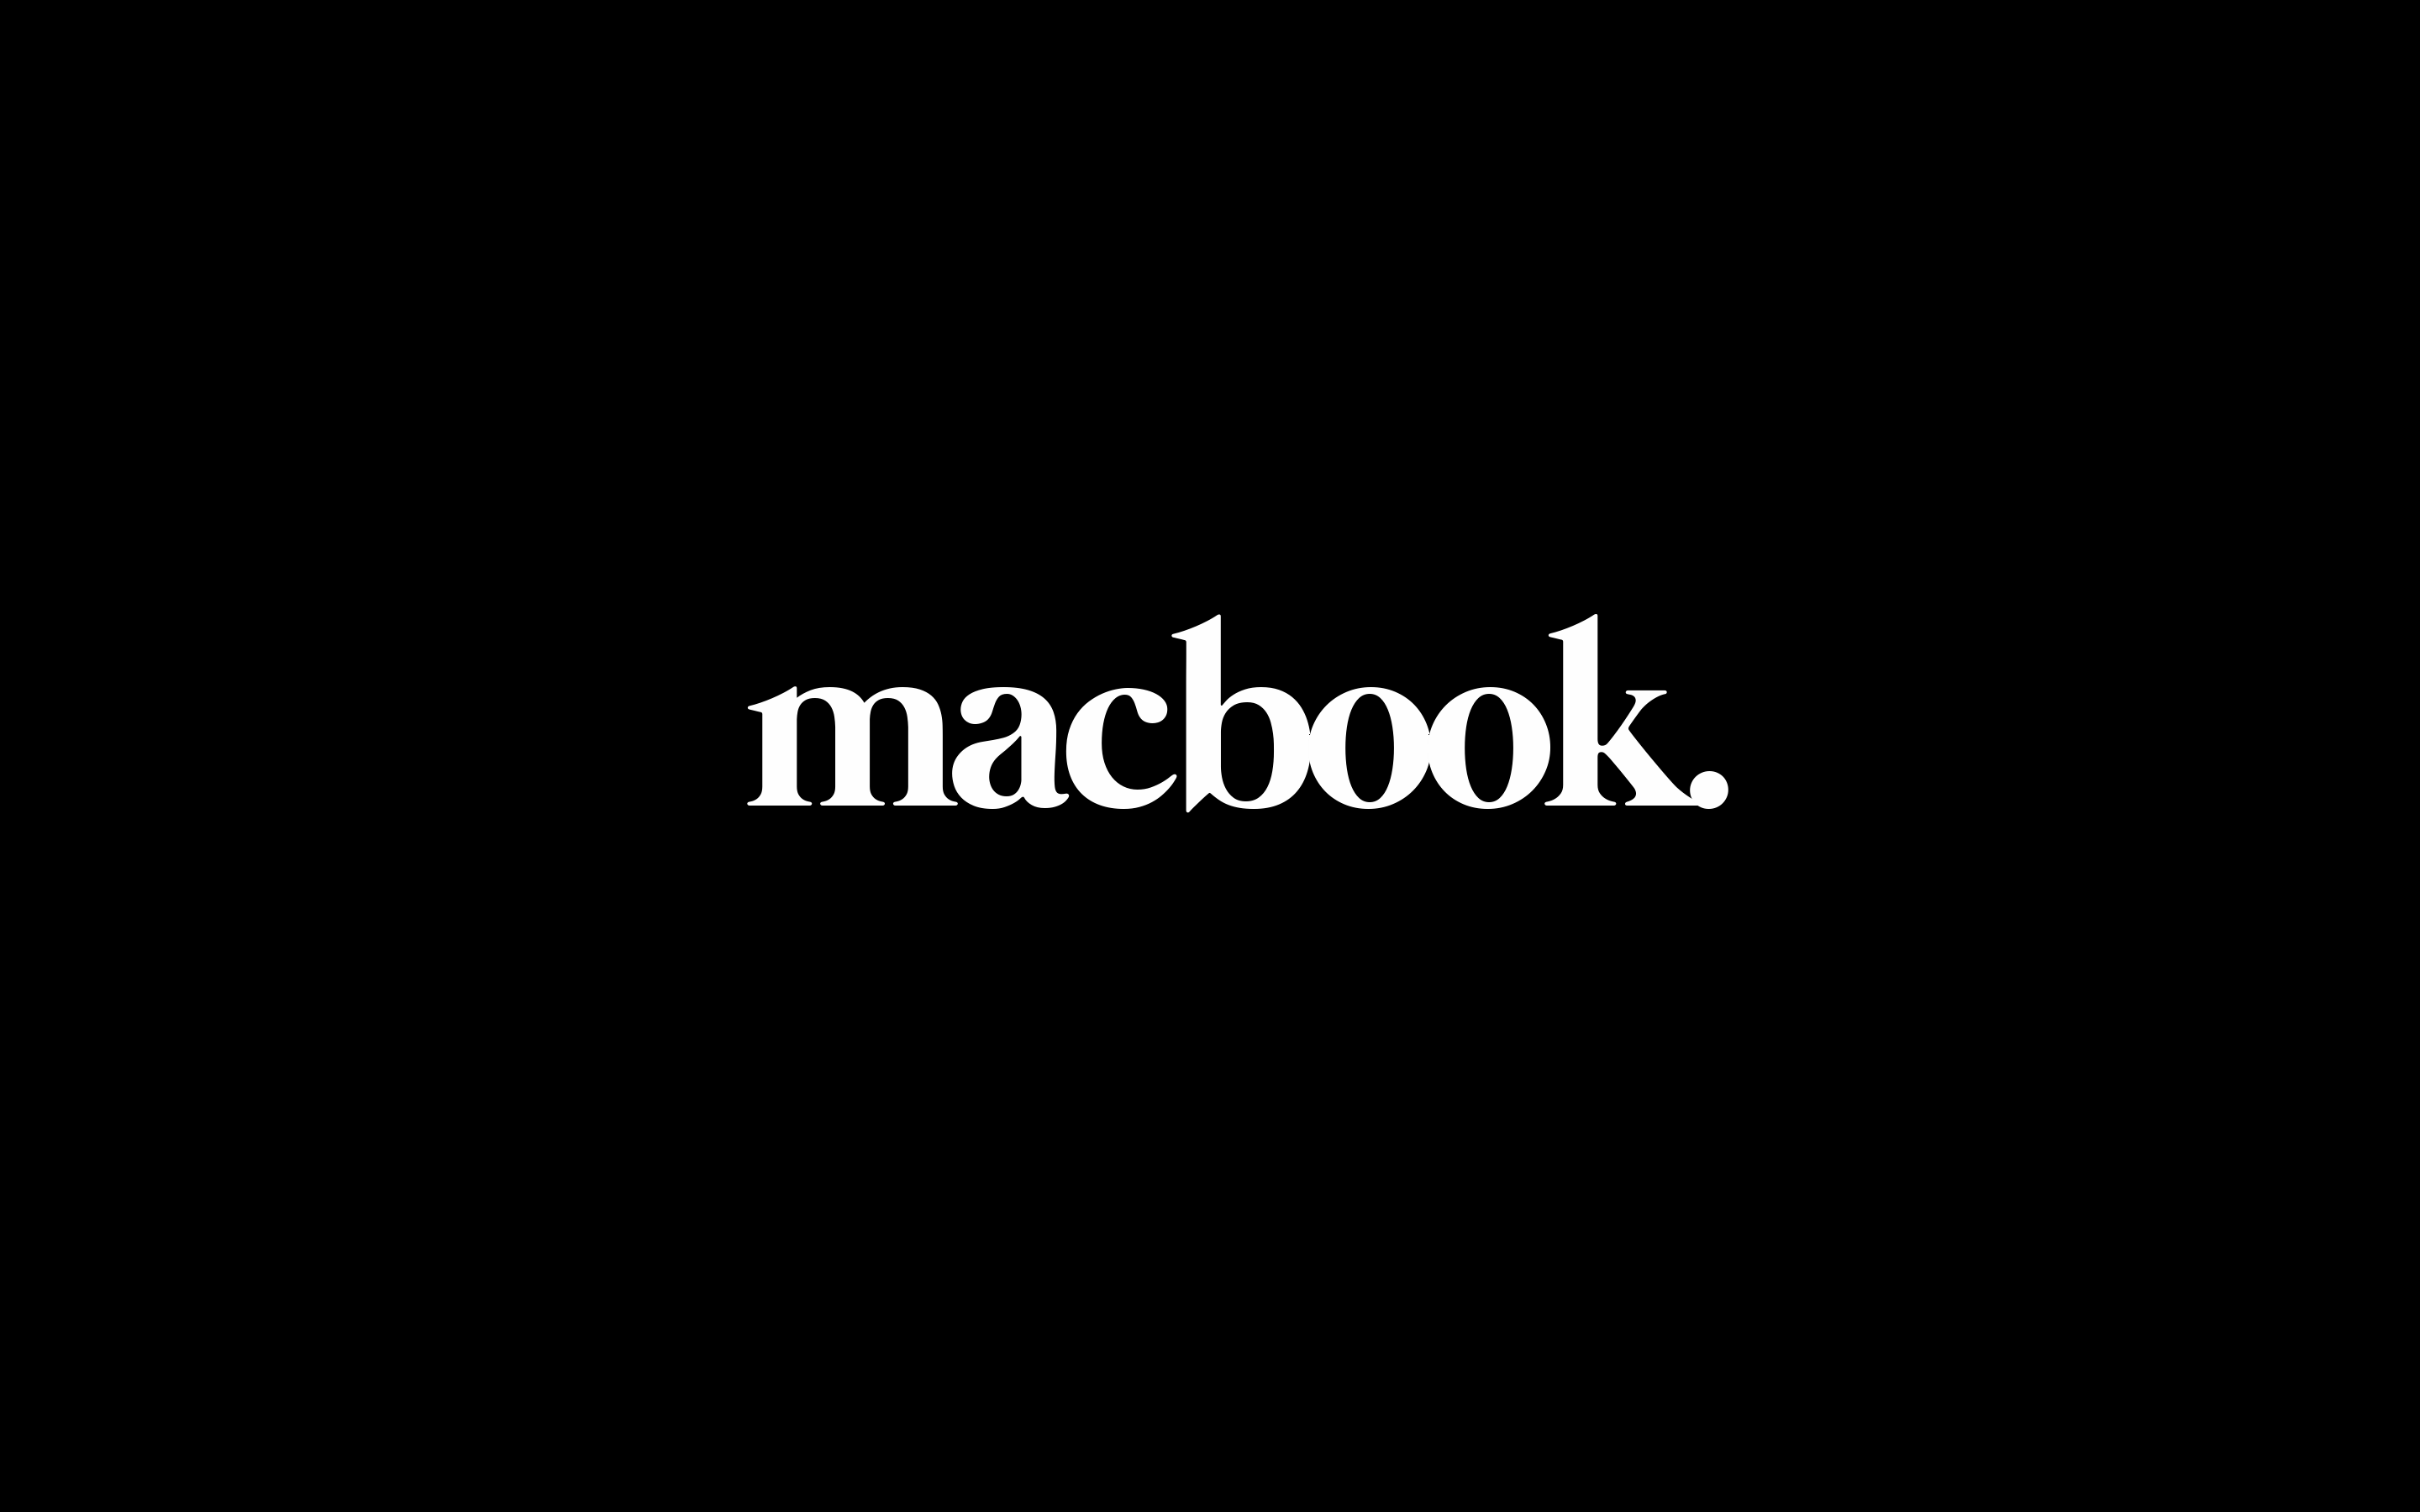 FREE macbook high res background for your macbook or desktop computer! Cute, aesthetic designs